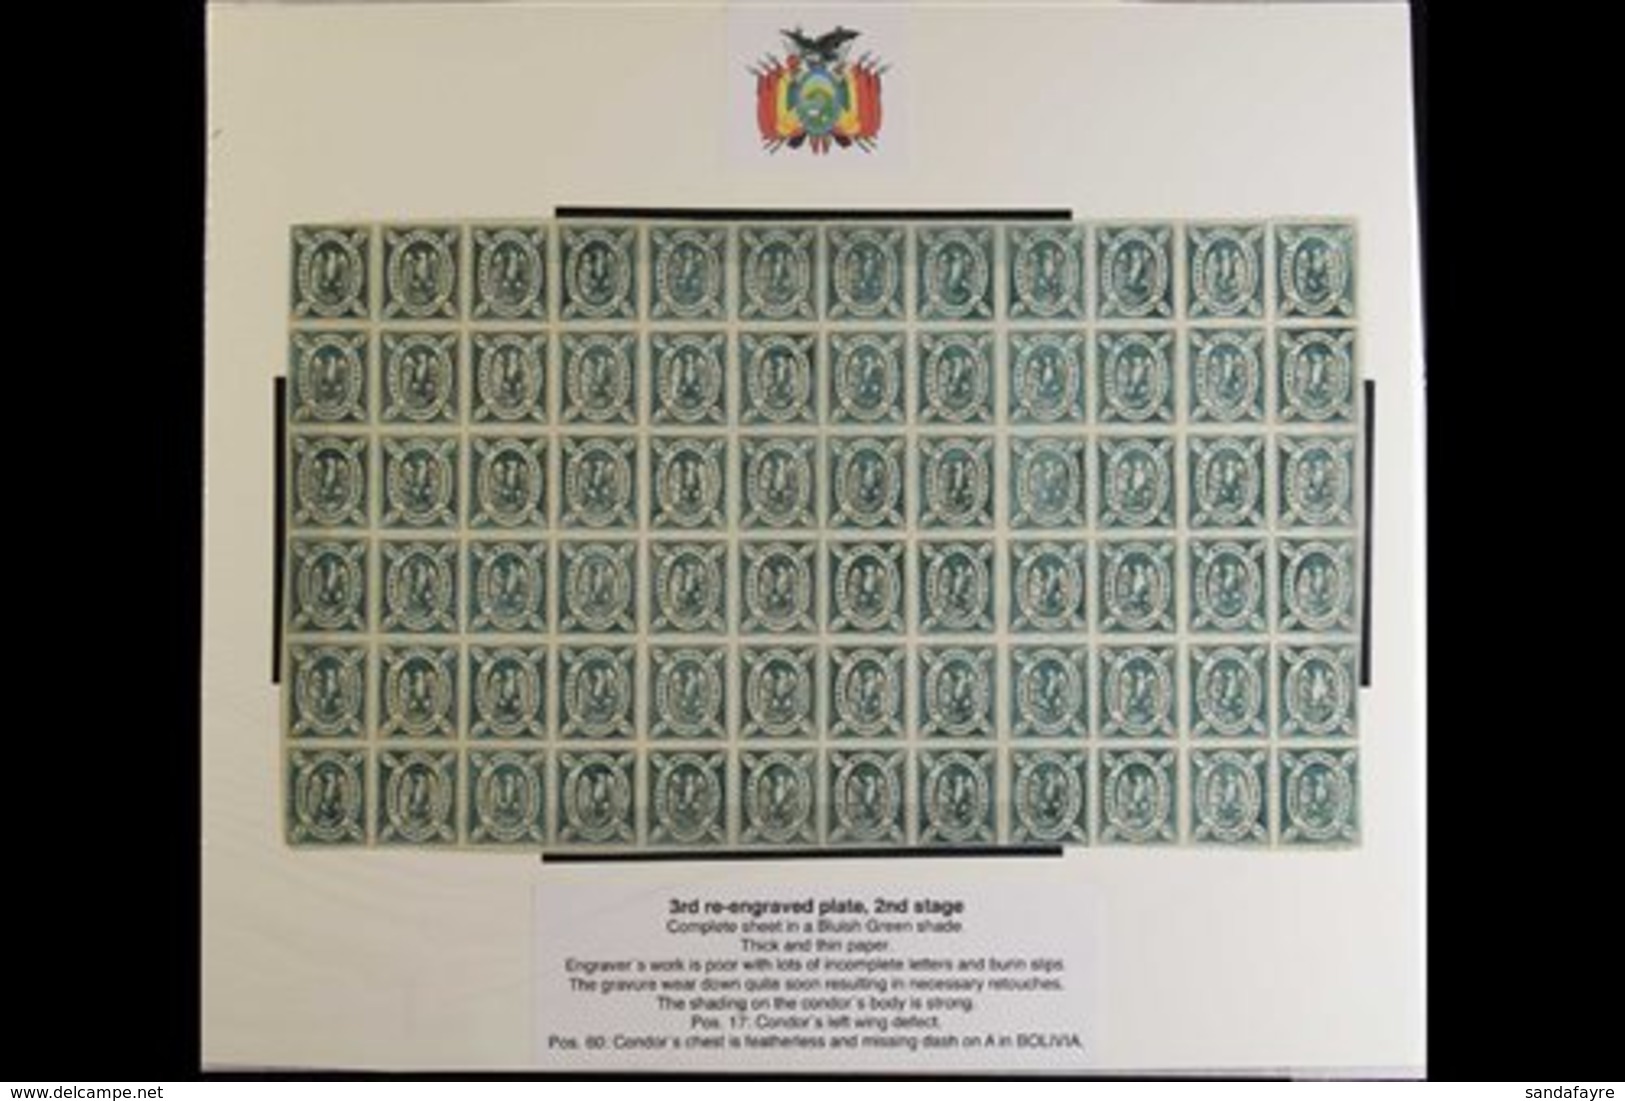 \Y 1867-68\Y CONDOR 5c Bluish Green (3rd Re-engraving, 2nd Stage) - A COMPLETE  MINT SHEET OF 72 STAMPS (12 X 6), Lovely - Bolivia